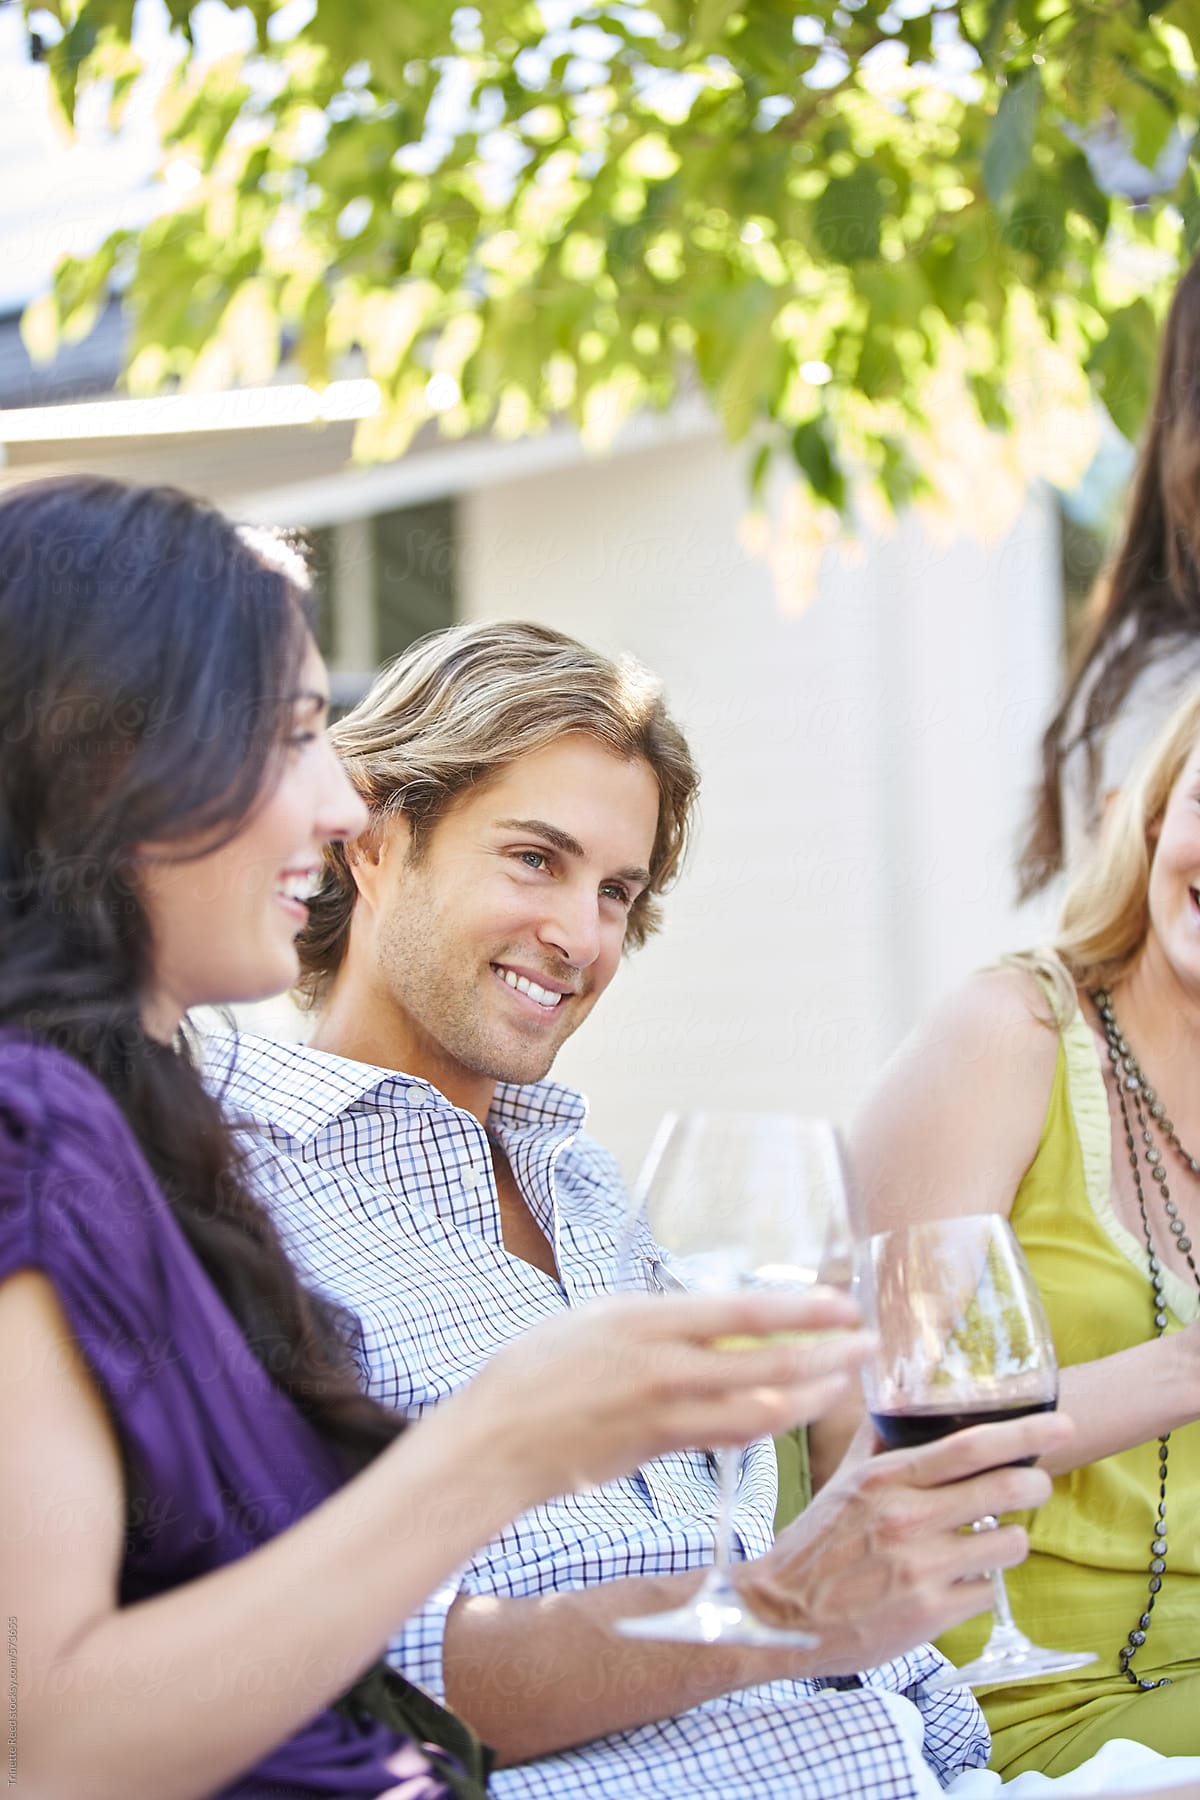 Group of friends drinking wine together outdoors